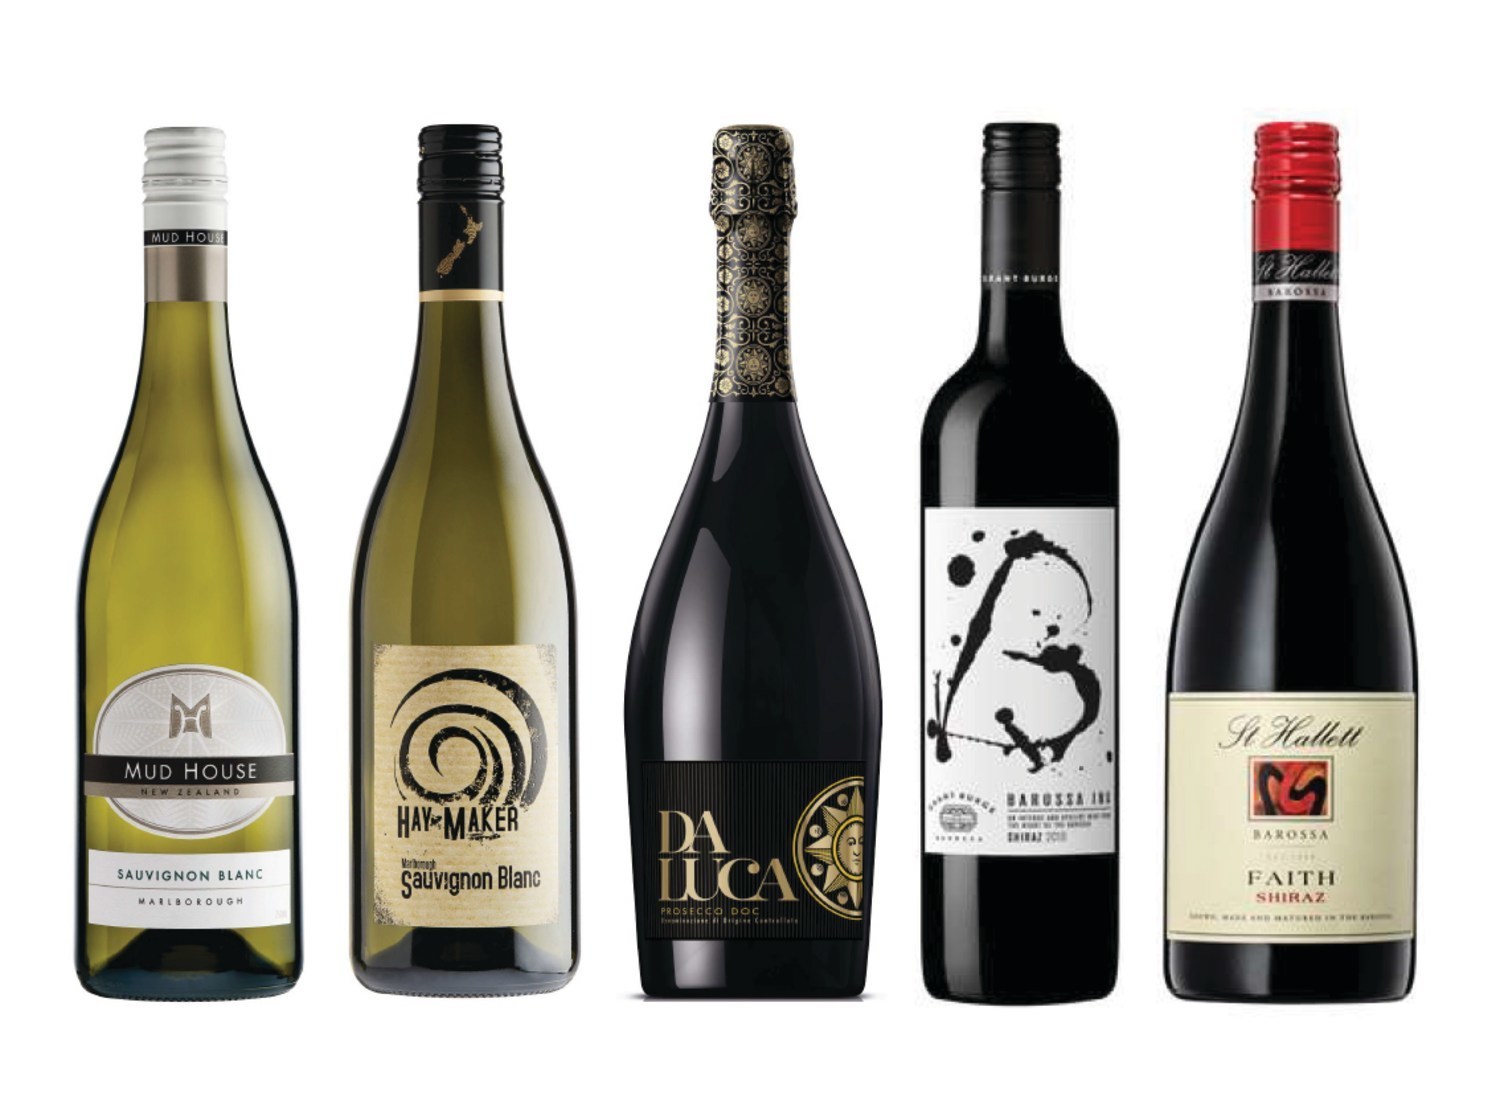 These wines are among those Accolade Wines now imported into US by Quintessential